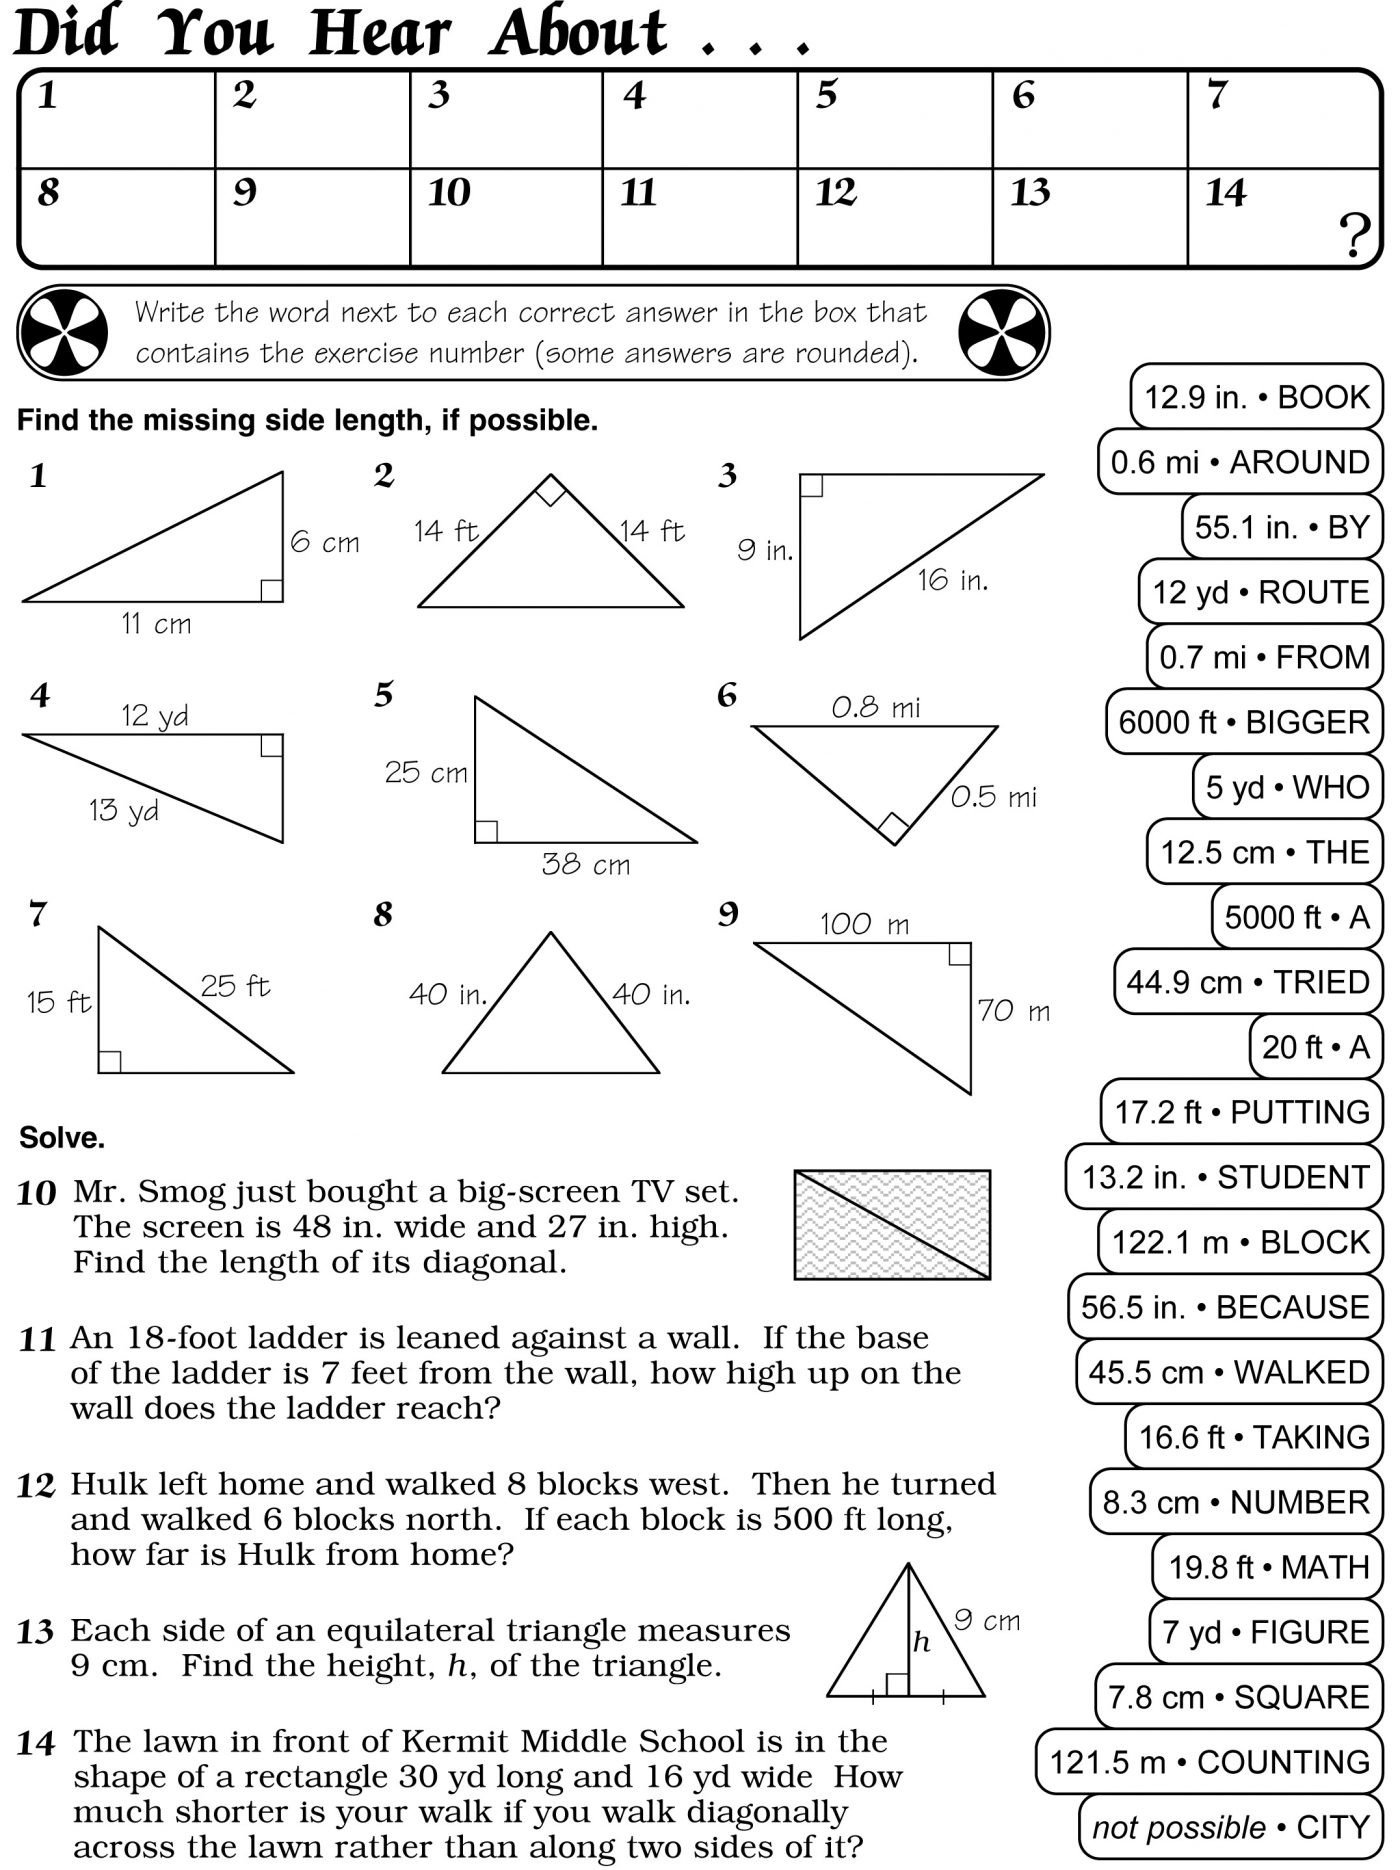 Ideas Of Worksheet Answers To Did You Hear About Math Worksheet Hate In Did You Hear About Math Worksheet Algebra With Pizzazz Answers